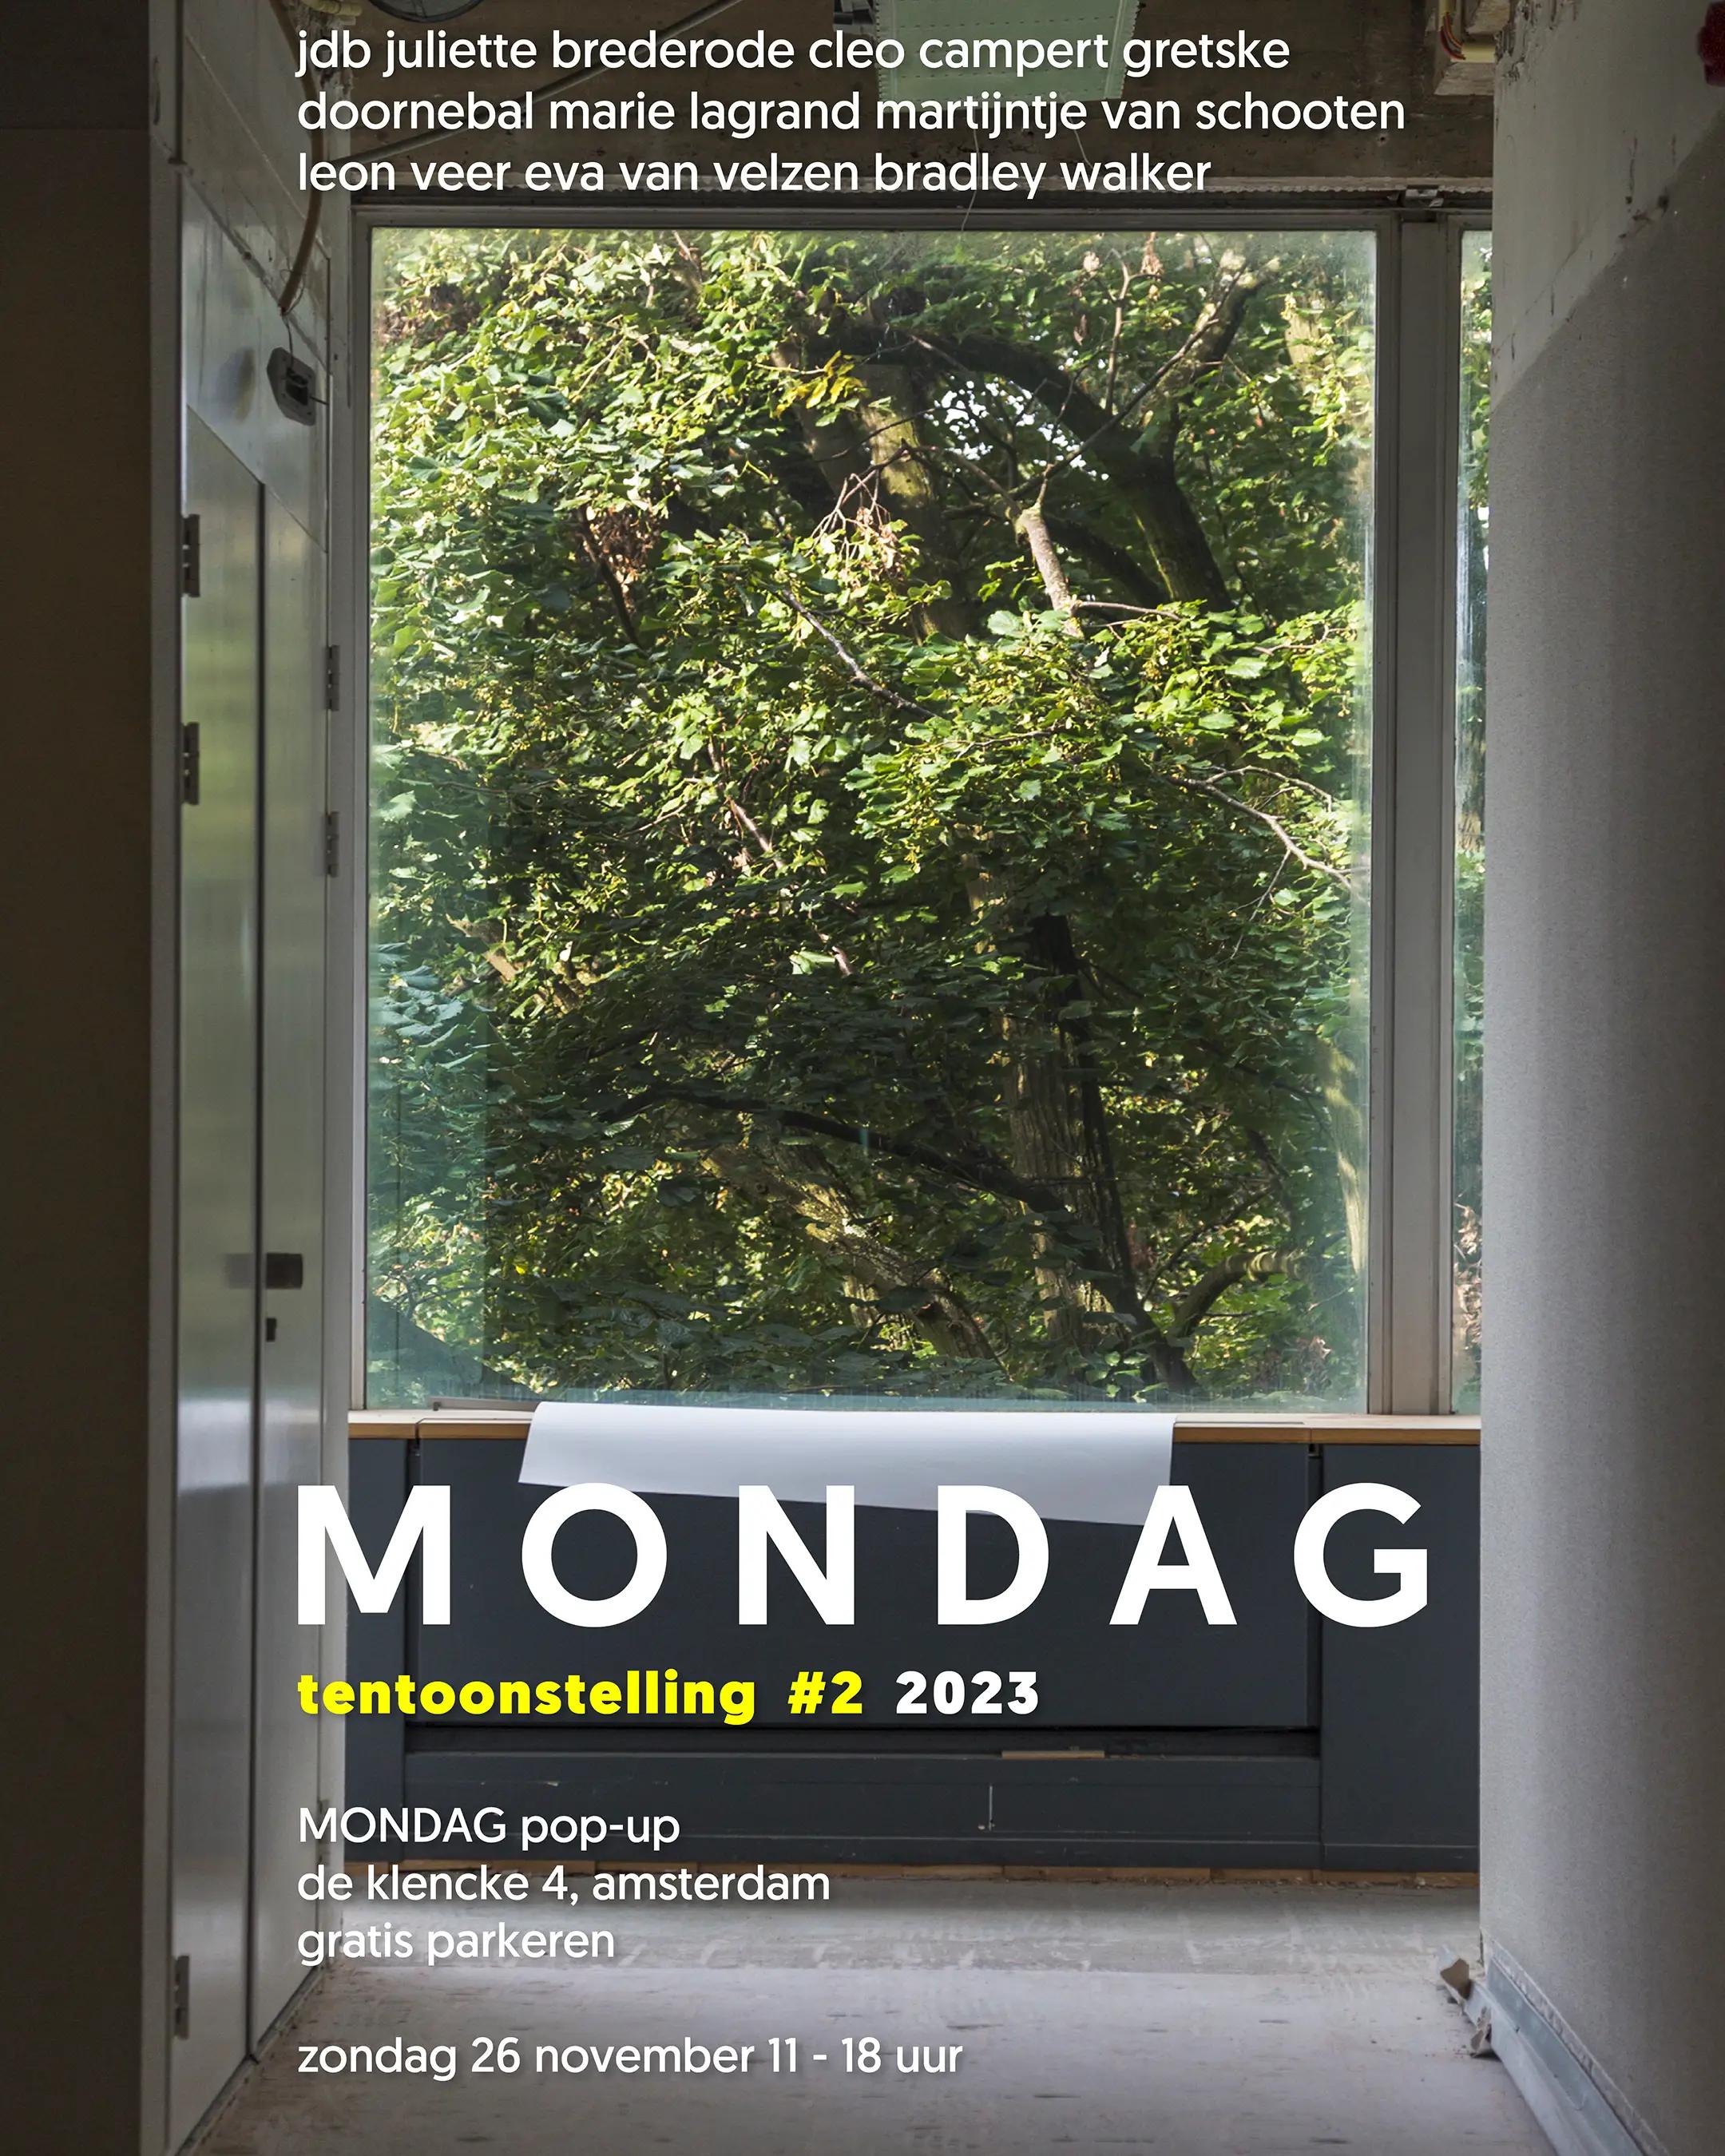 Upcoming exhibition Tentoonstelling #2 by M O N D A G, 26 — 26 November 2023